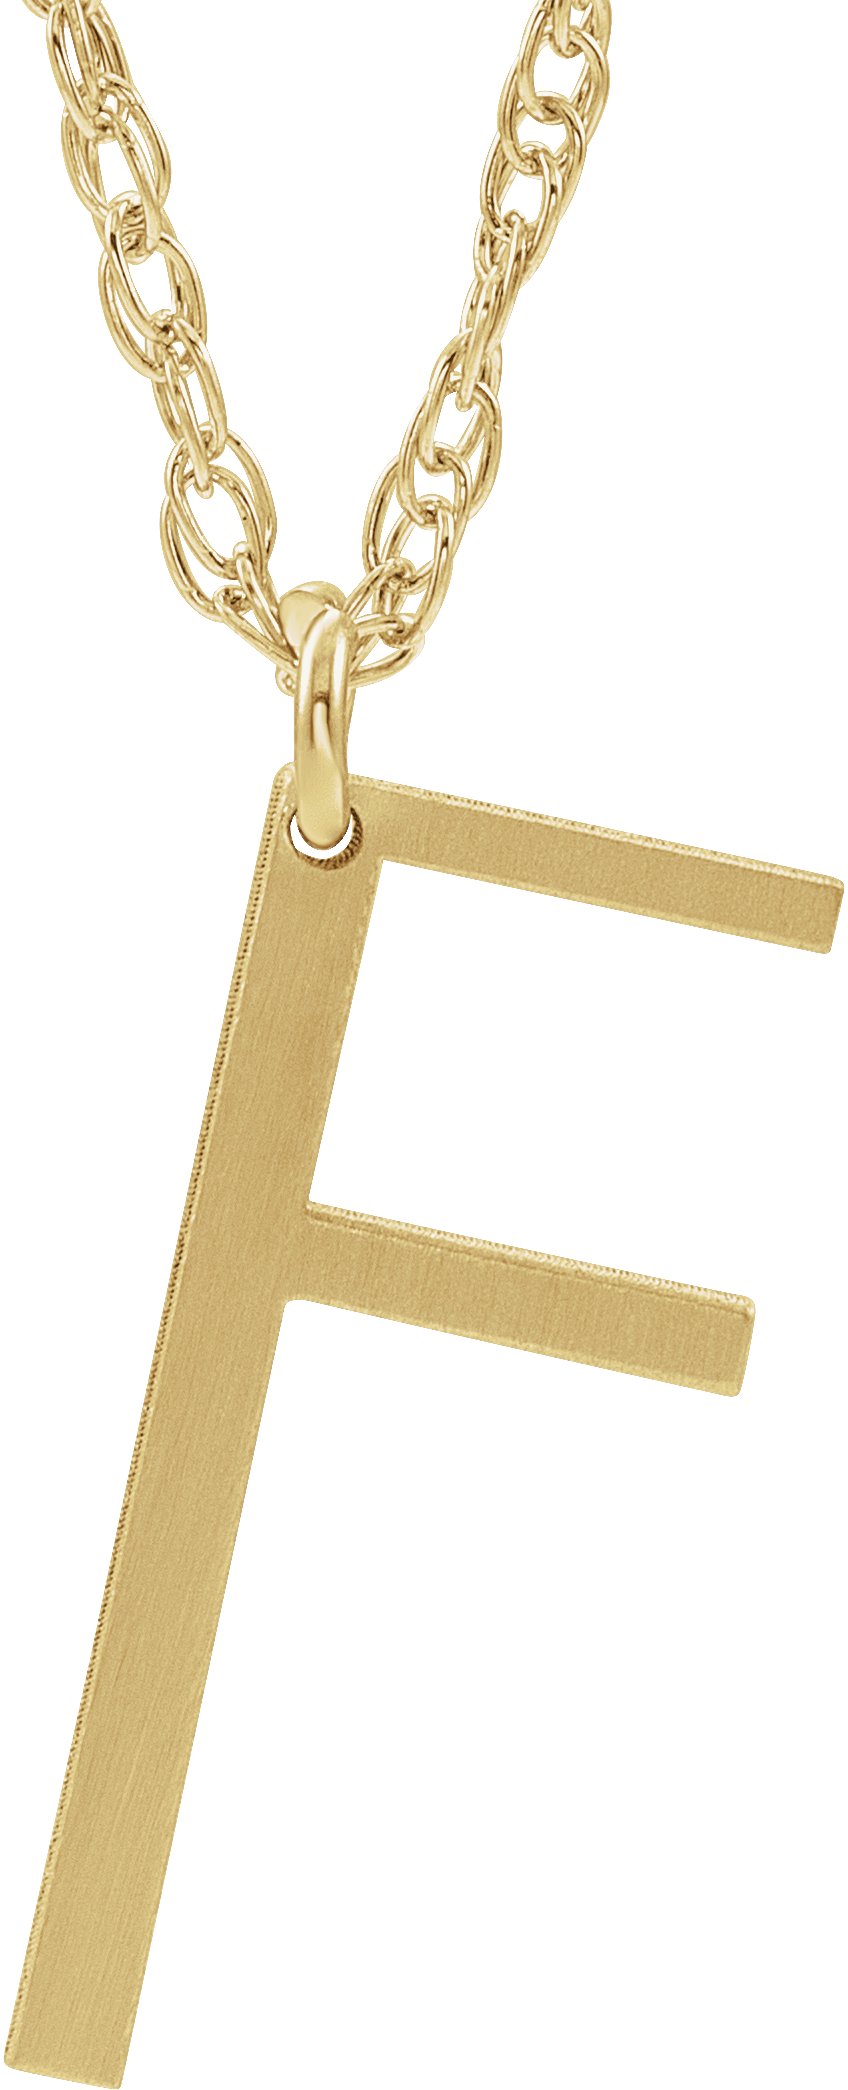 14K Yellow Gold-Plated Sterling Silver Block Initial F 16-18" Necklace with Brush Finish